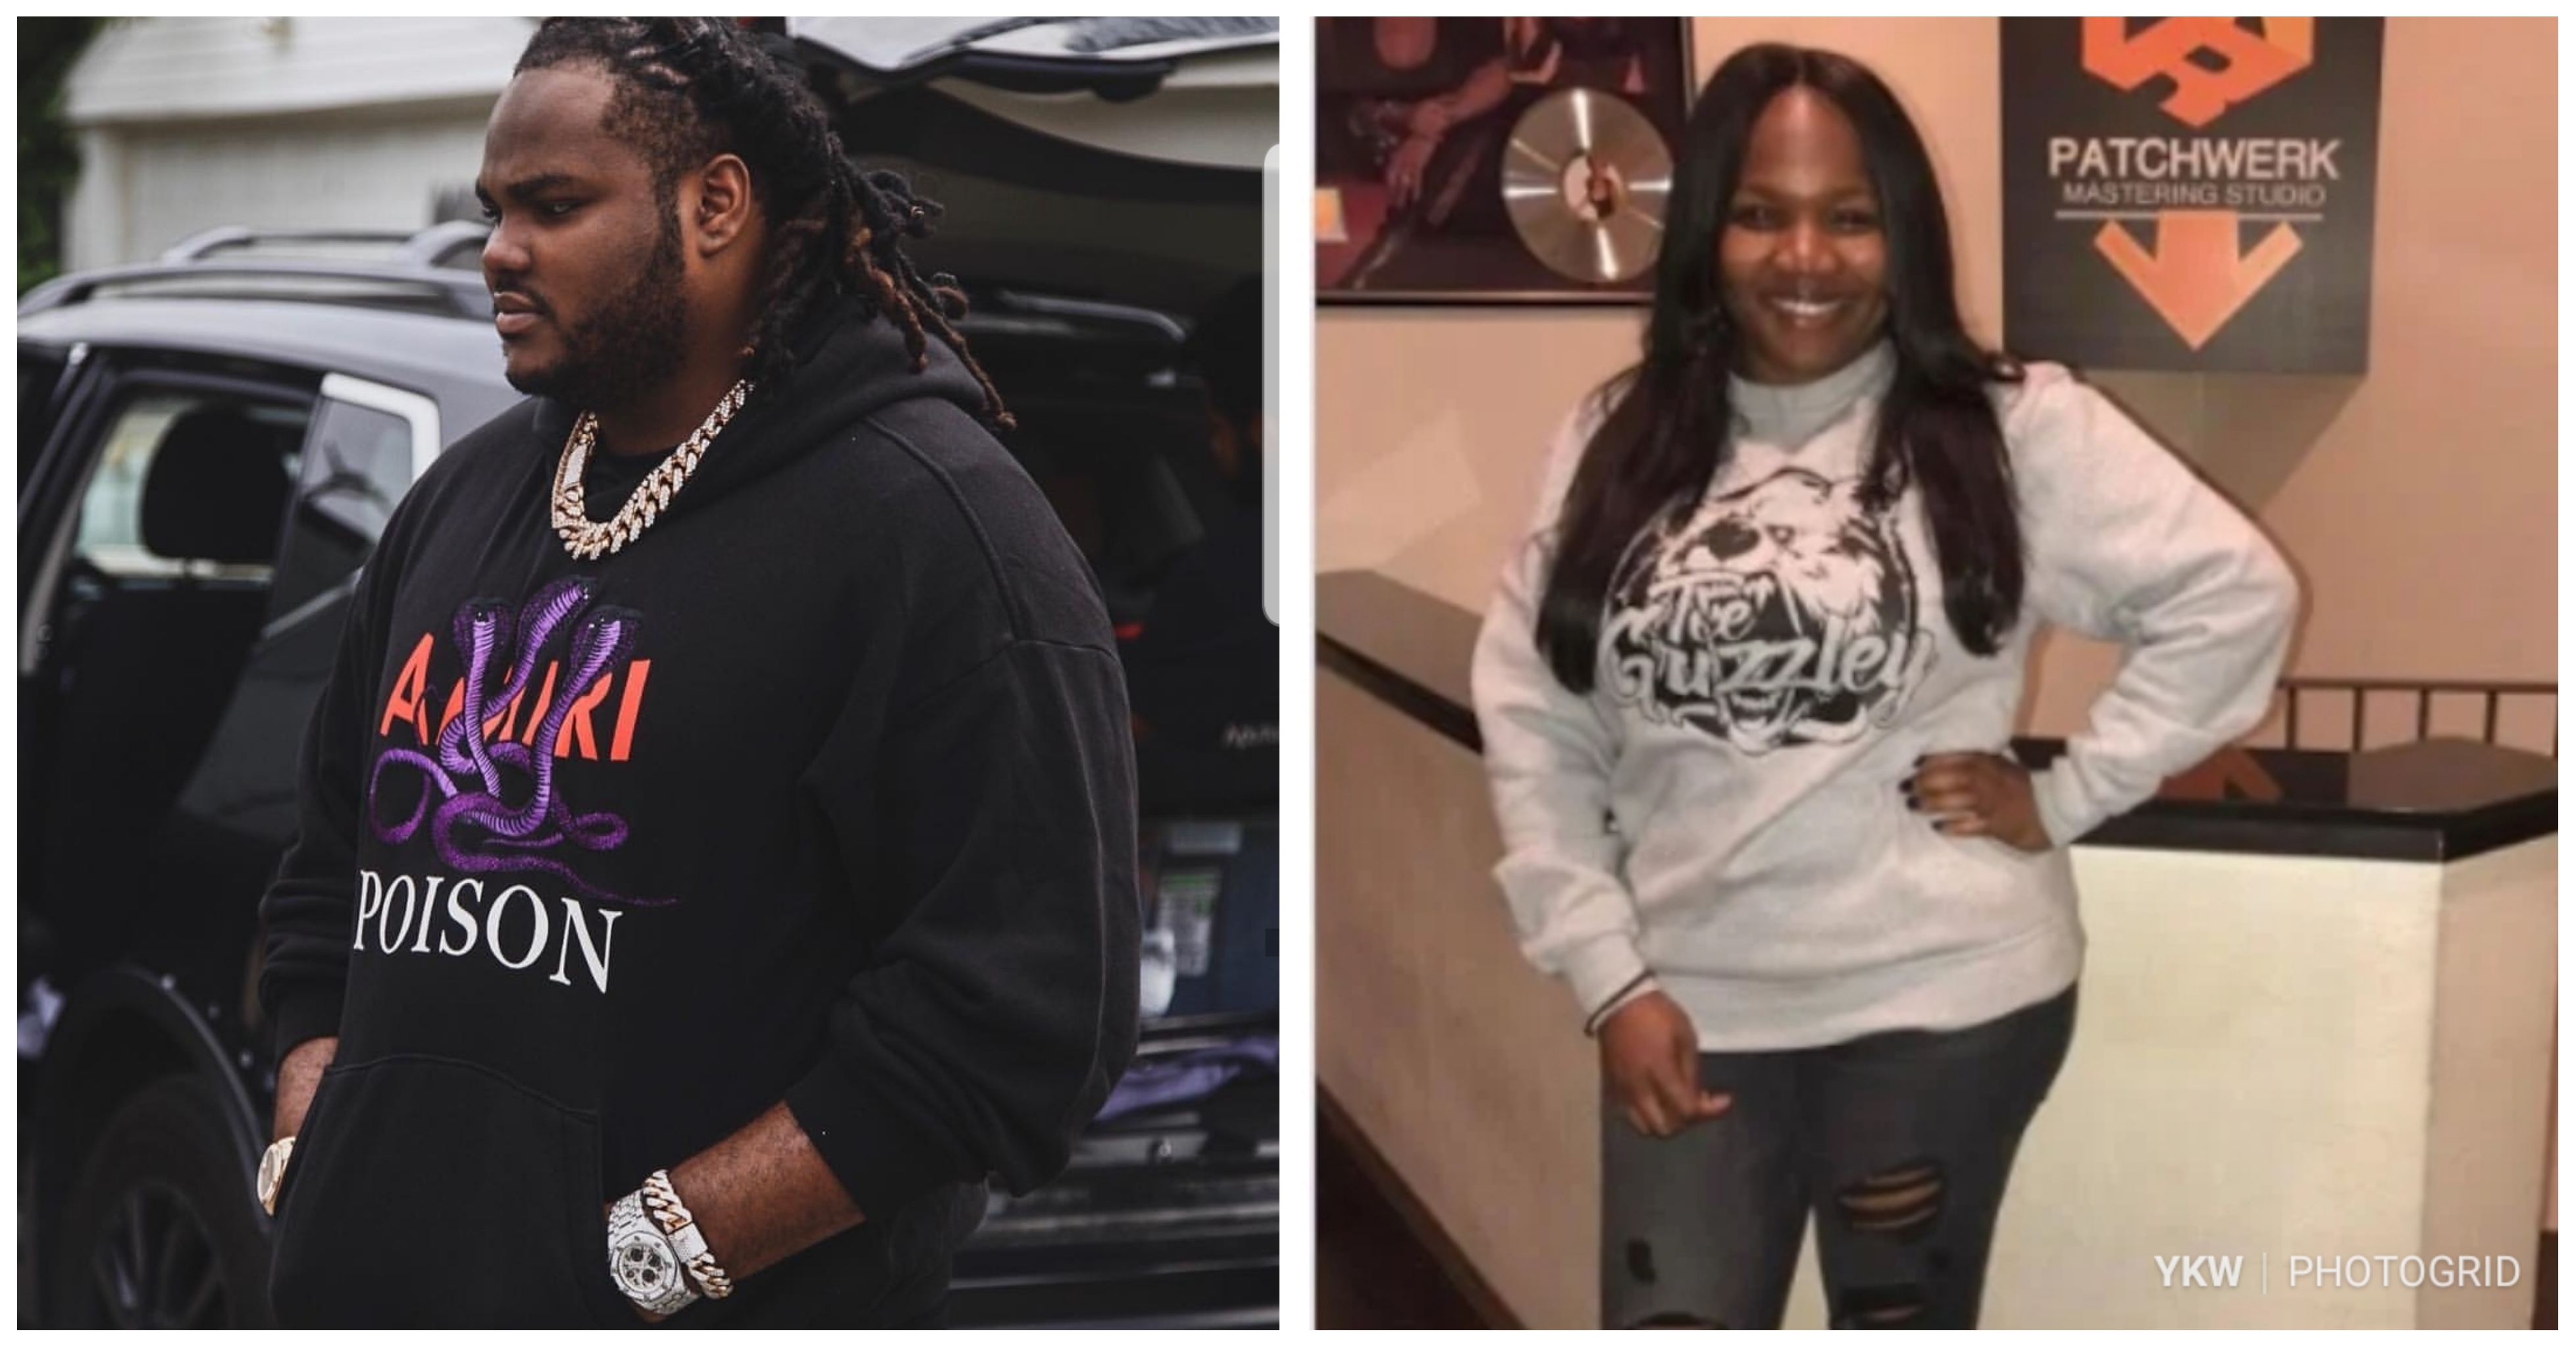 Rapper Tee Grizzley Car Was Shot Up In Detroit, His Aunt/Manager Was Killed